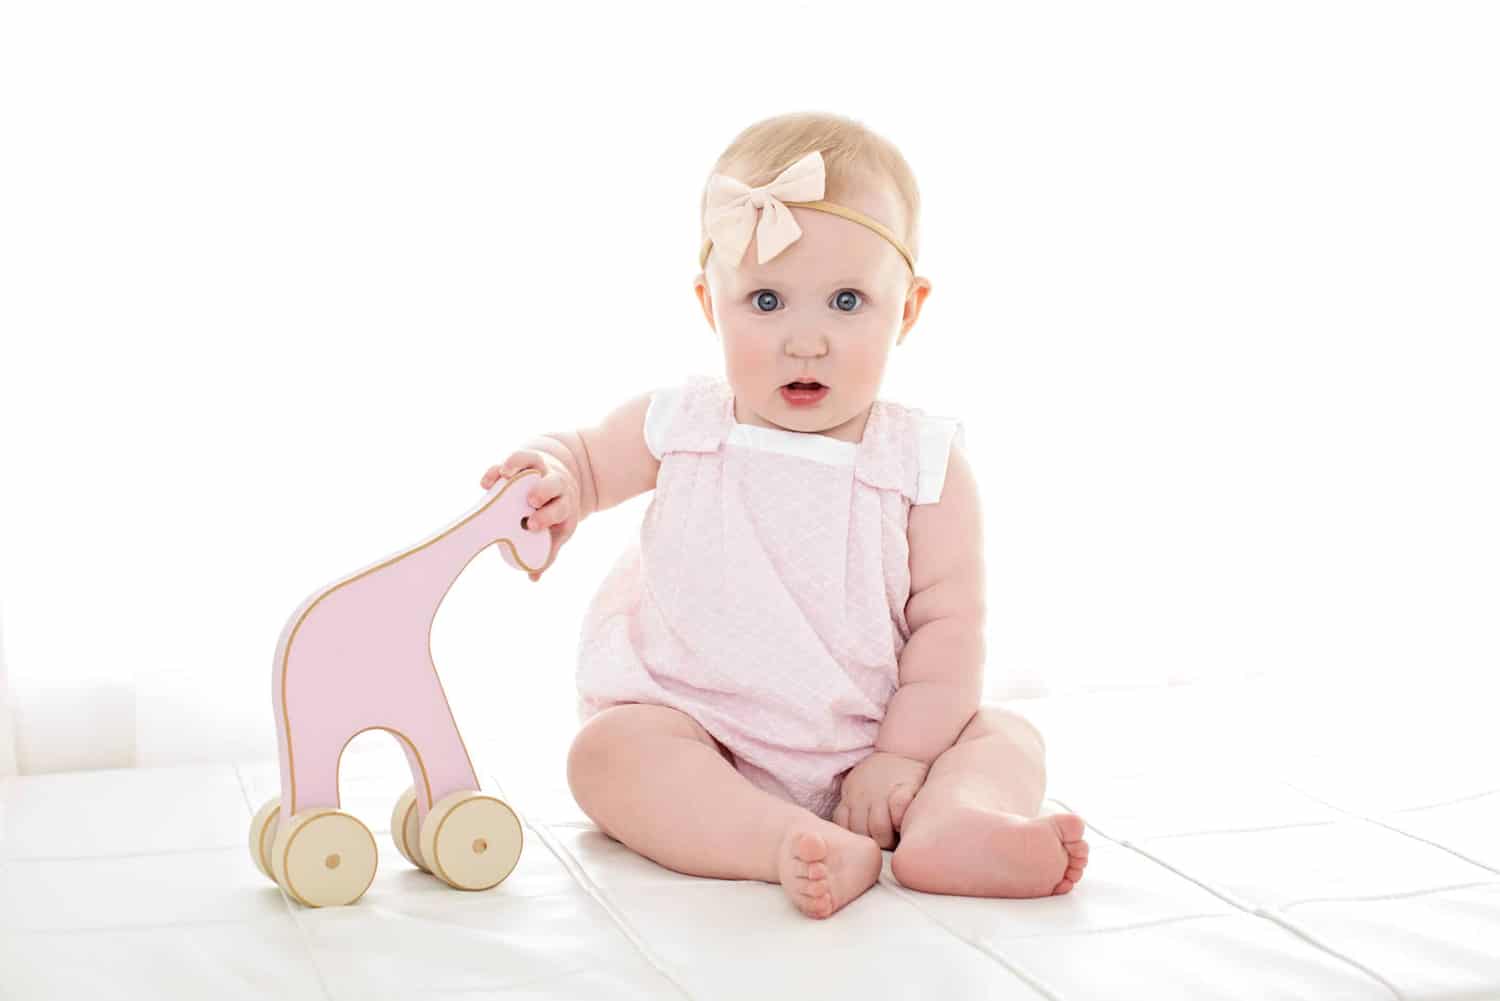 A baby girl plays with a pink wooden elephant.